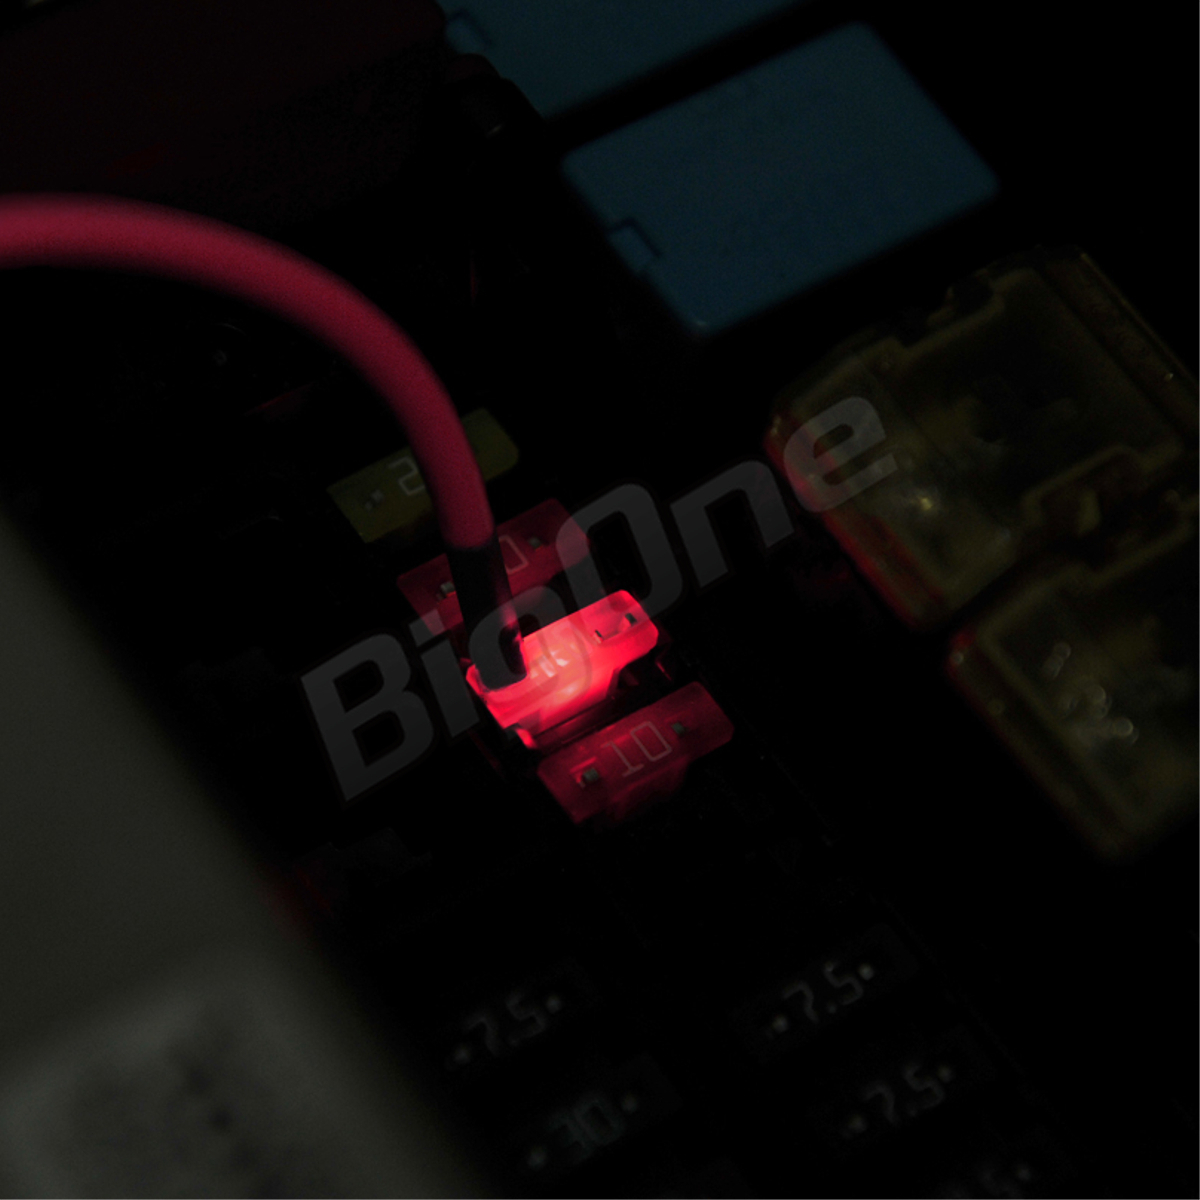 BigOne torn .. light ...... indicator built-in Mini flat type fuse power supply 30A ASP LED chigar lighter ETC drive recorder. connection 